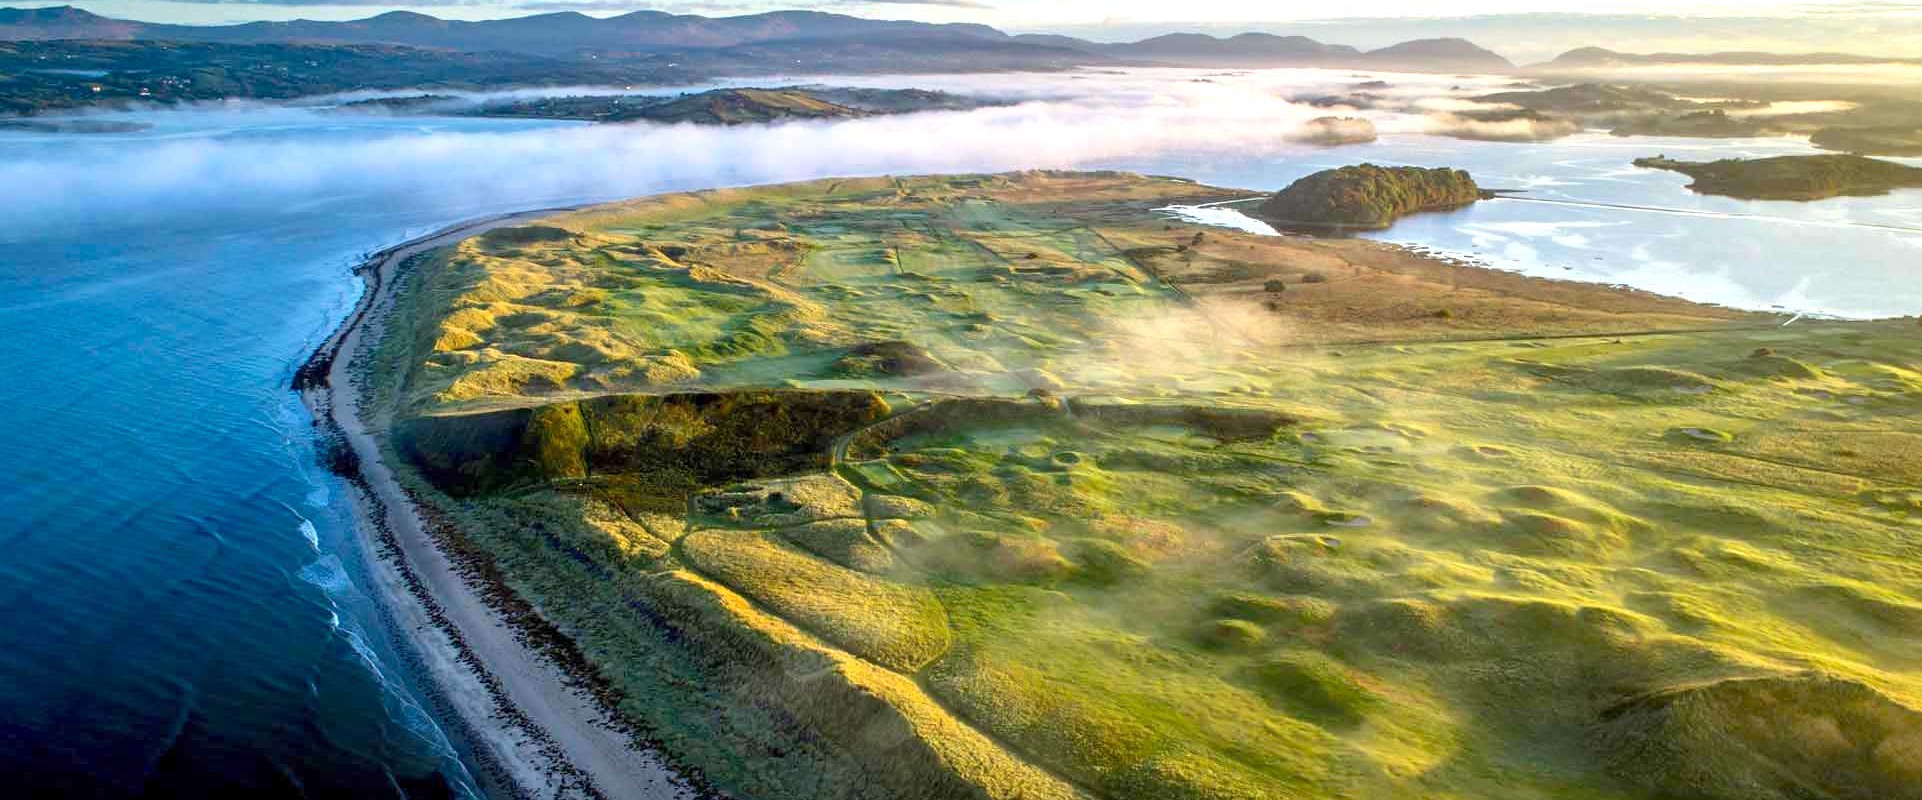 Mist over Donegal Golf Club